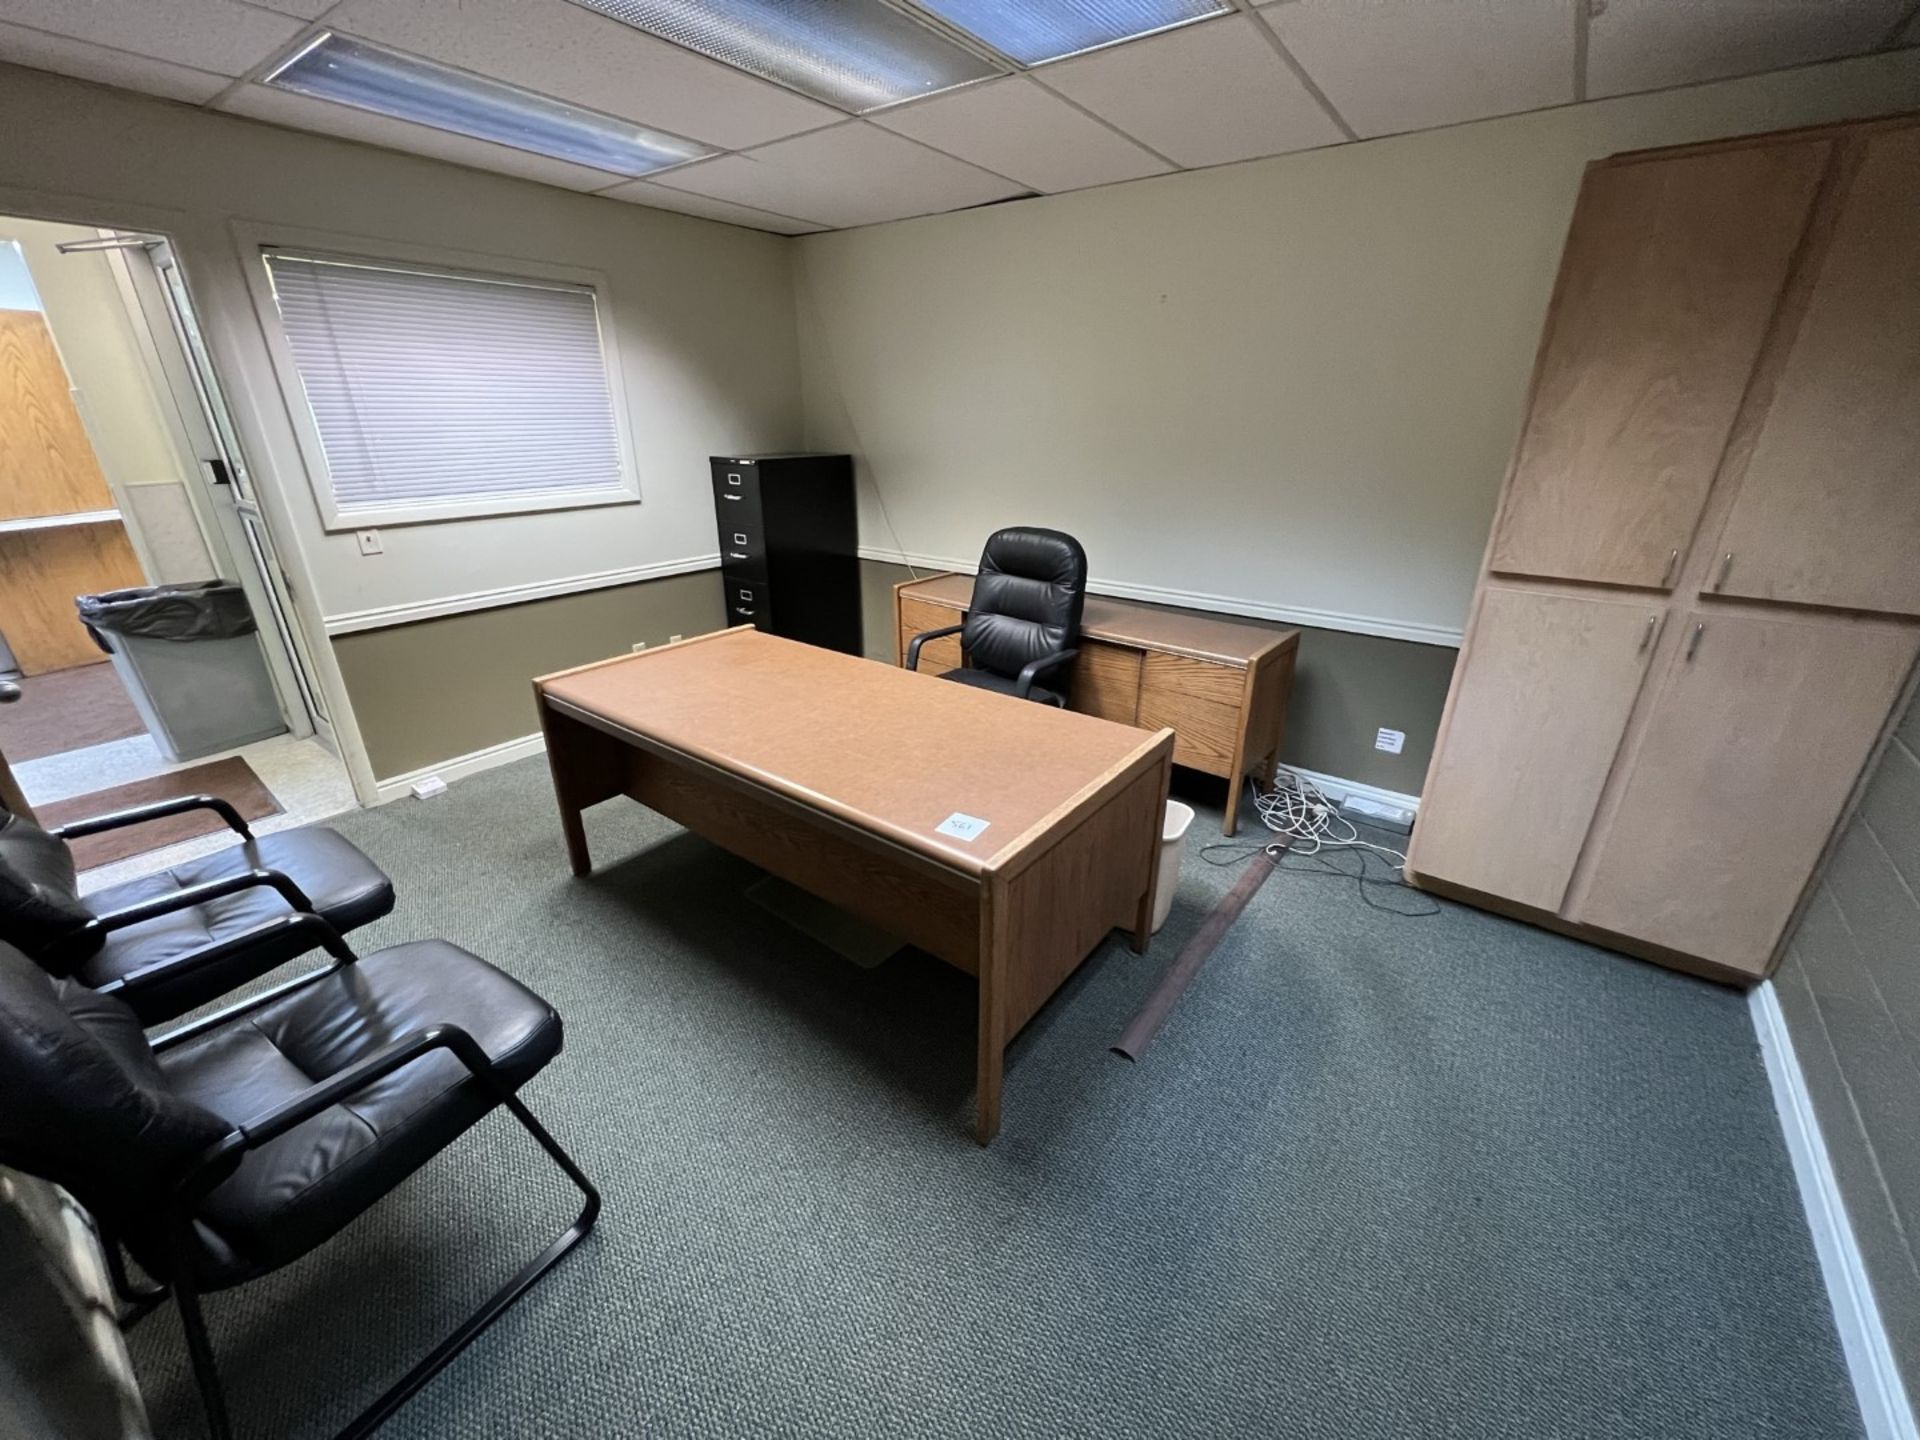 Office Furniture - Image 2 of 2